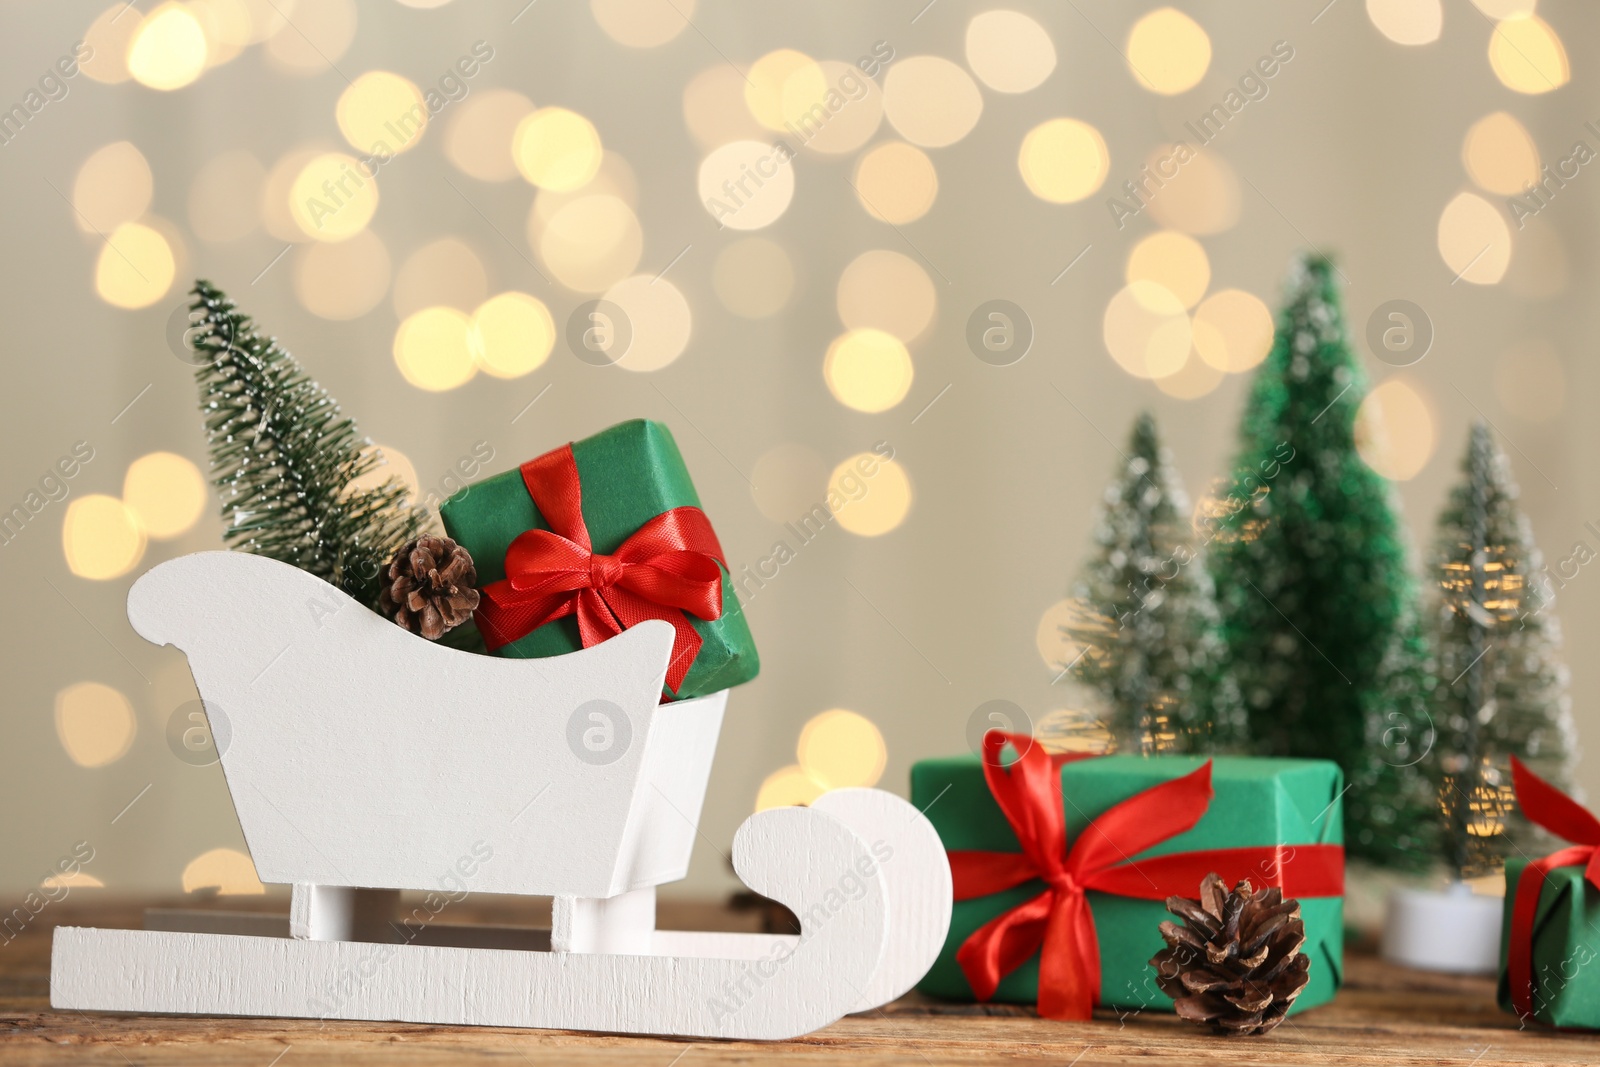 Photo of Small white sleigh, decorative Christmas trees and gift boxes on wooden table against blurred lights